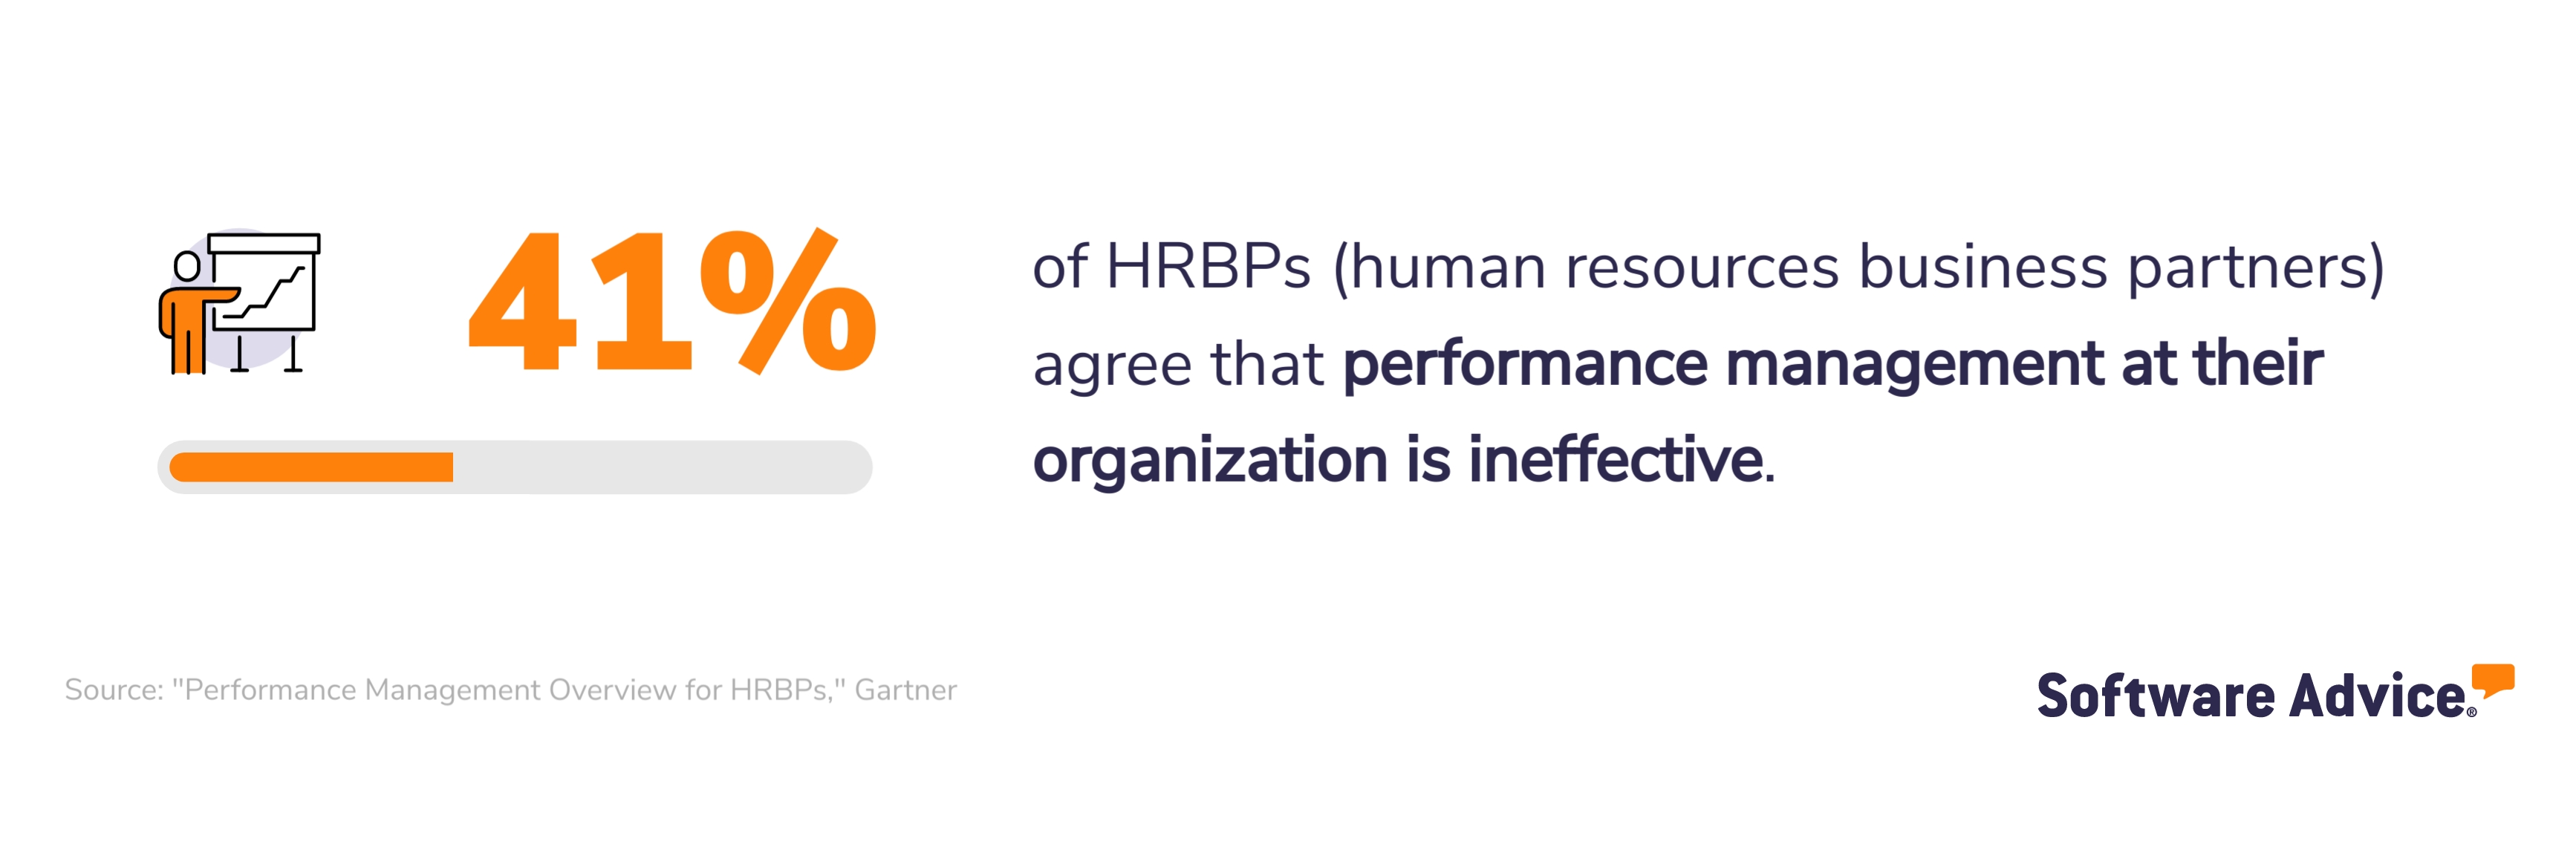 41% of HRBPs agree that performance management at their organization is ineffective